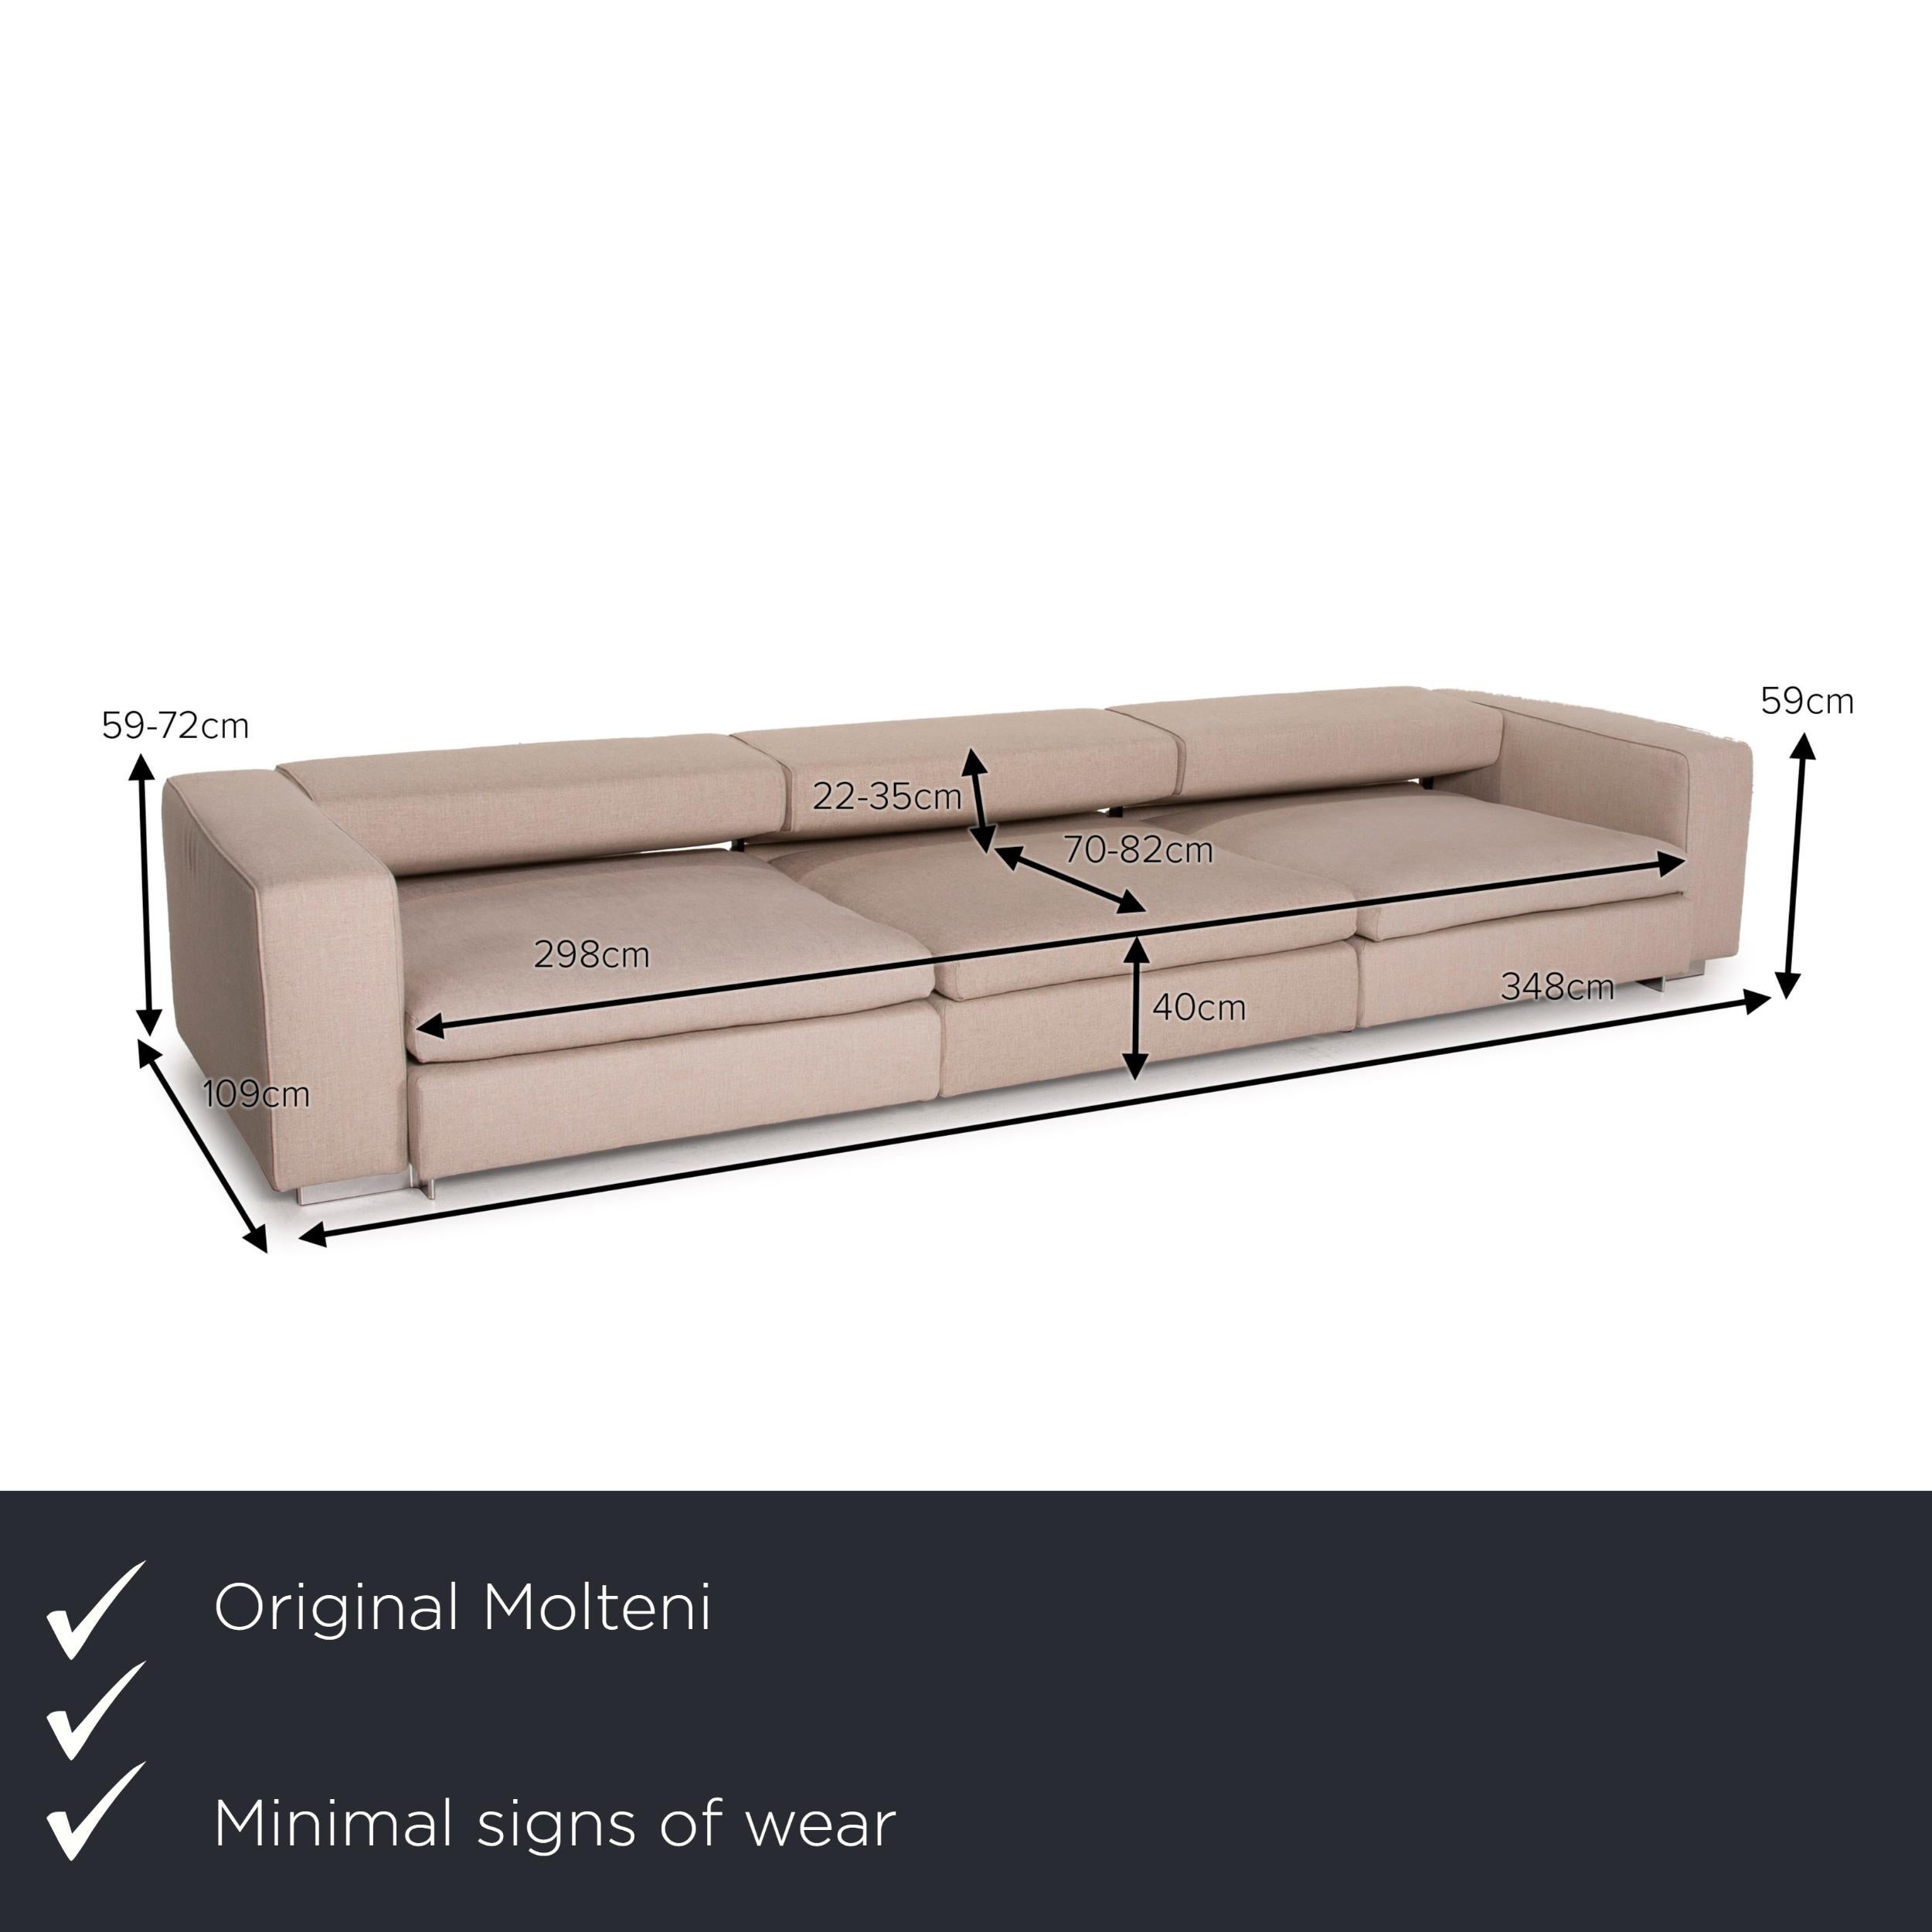 We present to you a Molteni Turner fabric sofa beige three-seater function.

Product measurements in centimeters:

Depth 109
Width 348
Height 59
Seat height 40
Rest height 59
Seat depth 70
Seat width 298
Back height 22.
 
 
   